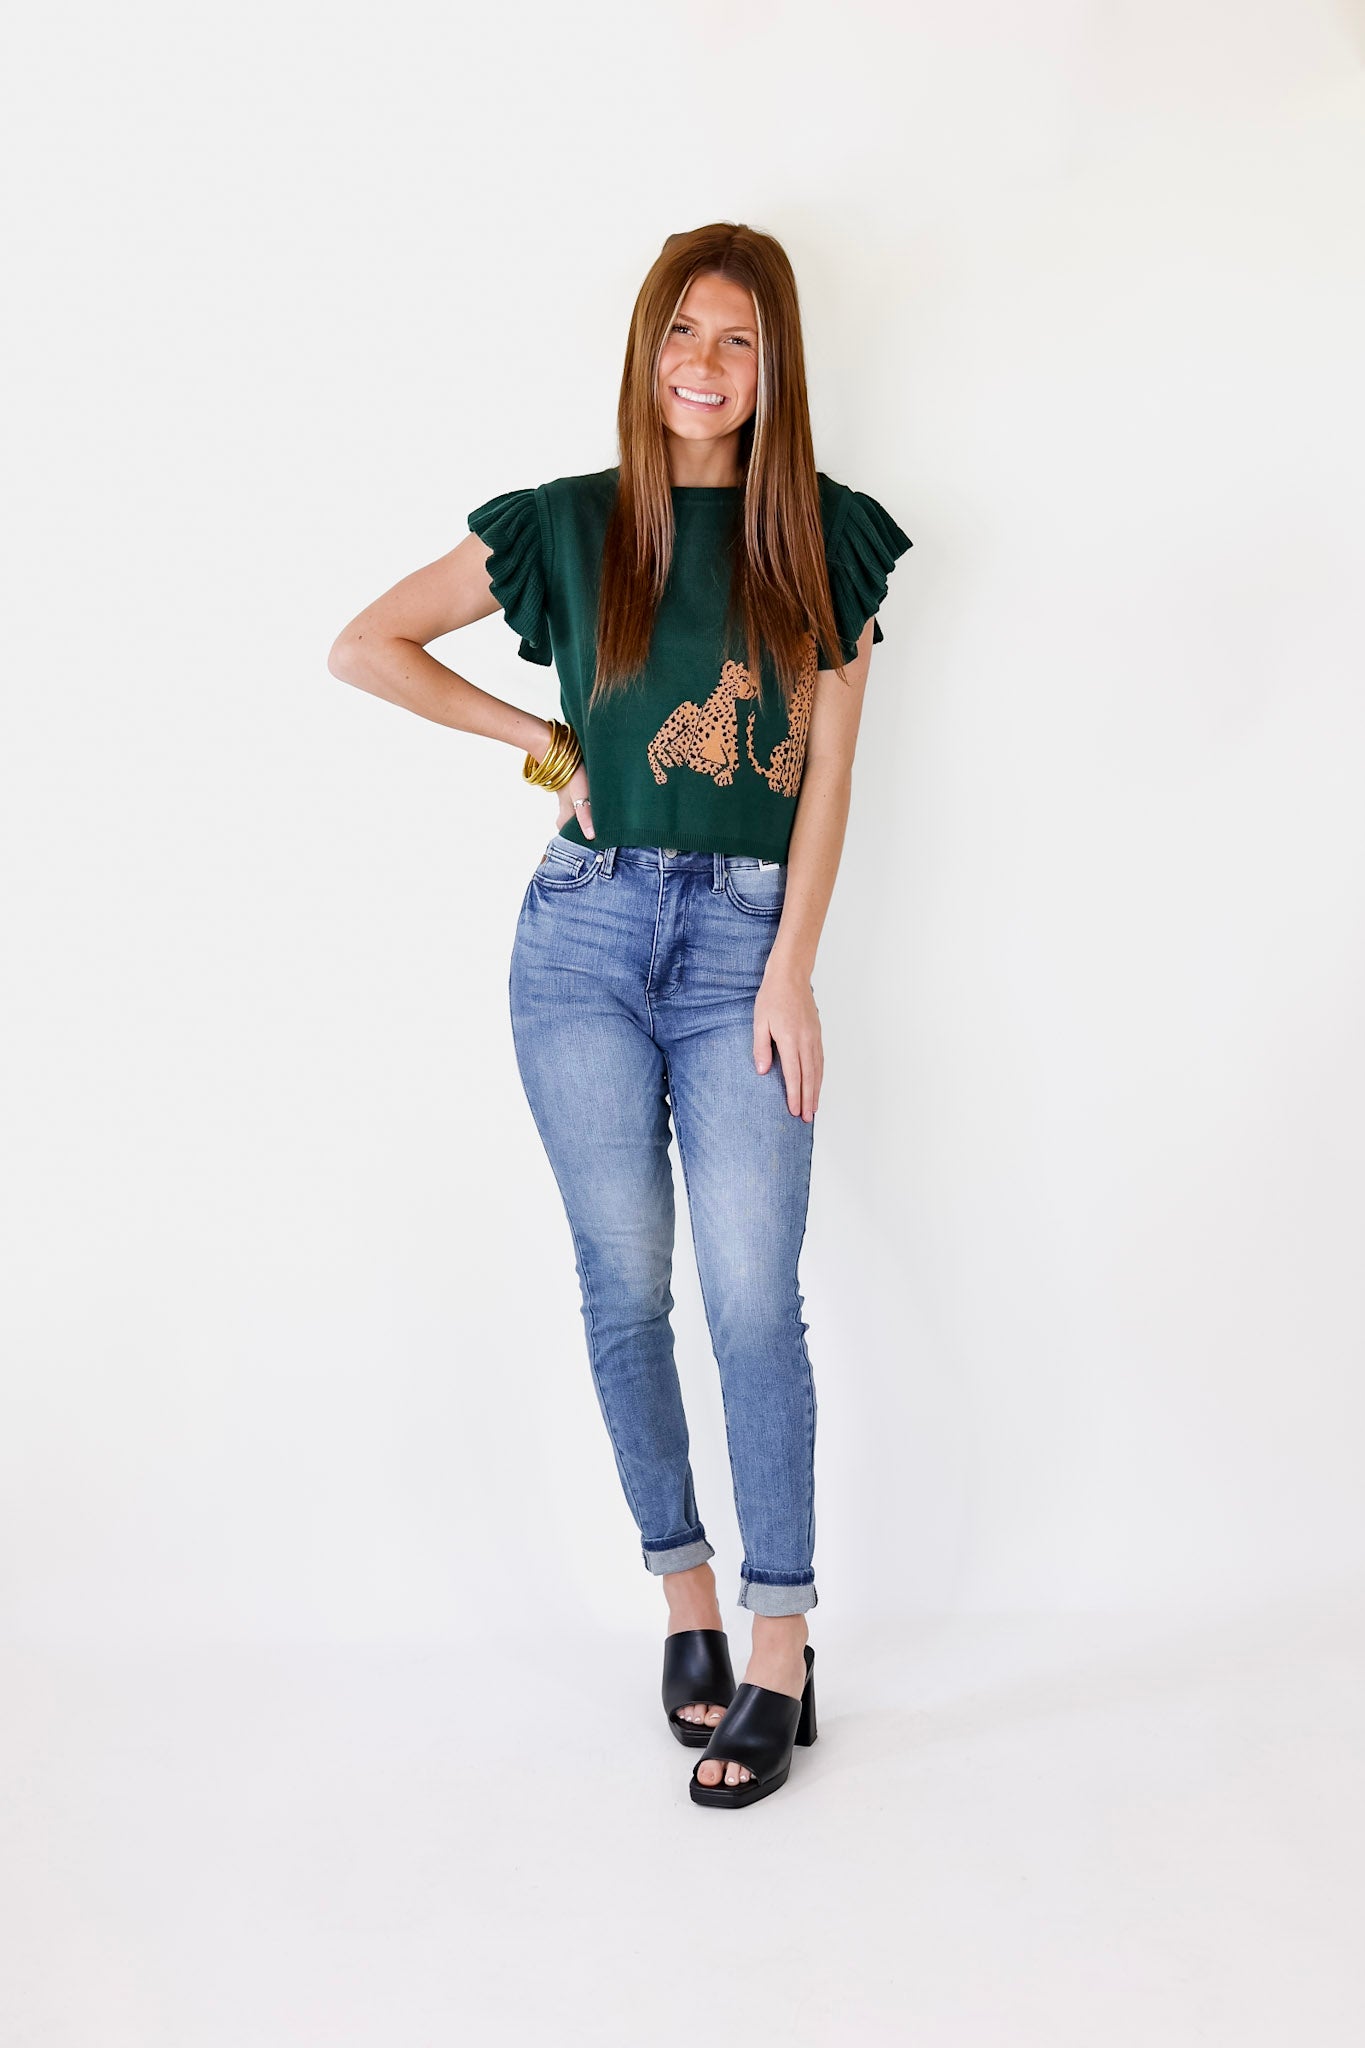 Talk This Way Cheetah Print Sweater Top with Ruffle Cap Sleeves in Hunter Green - Giddy Up Glamour Boutique